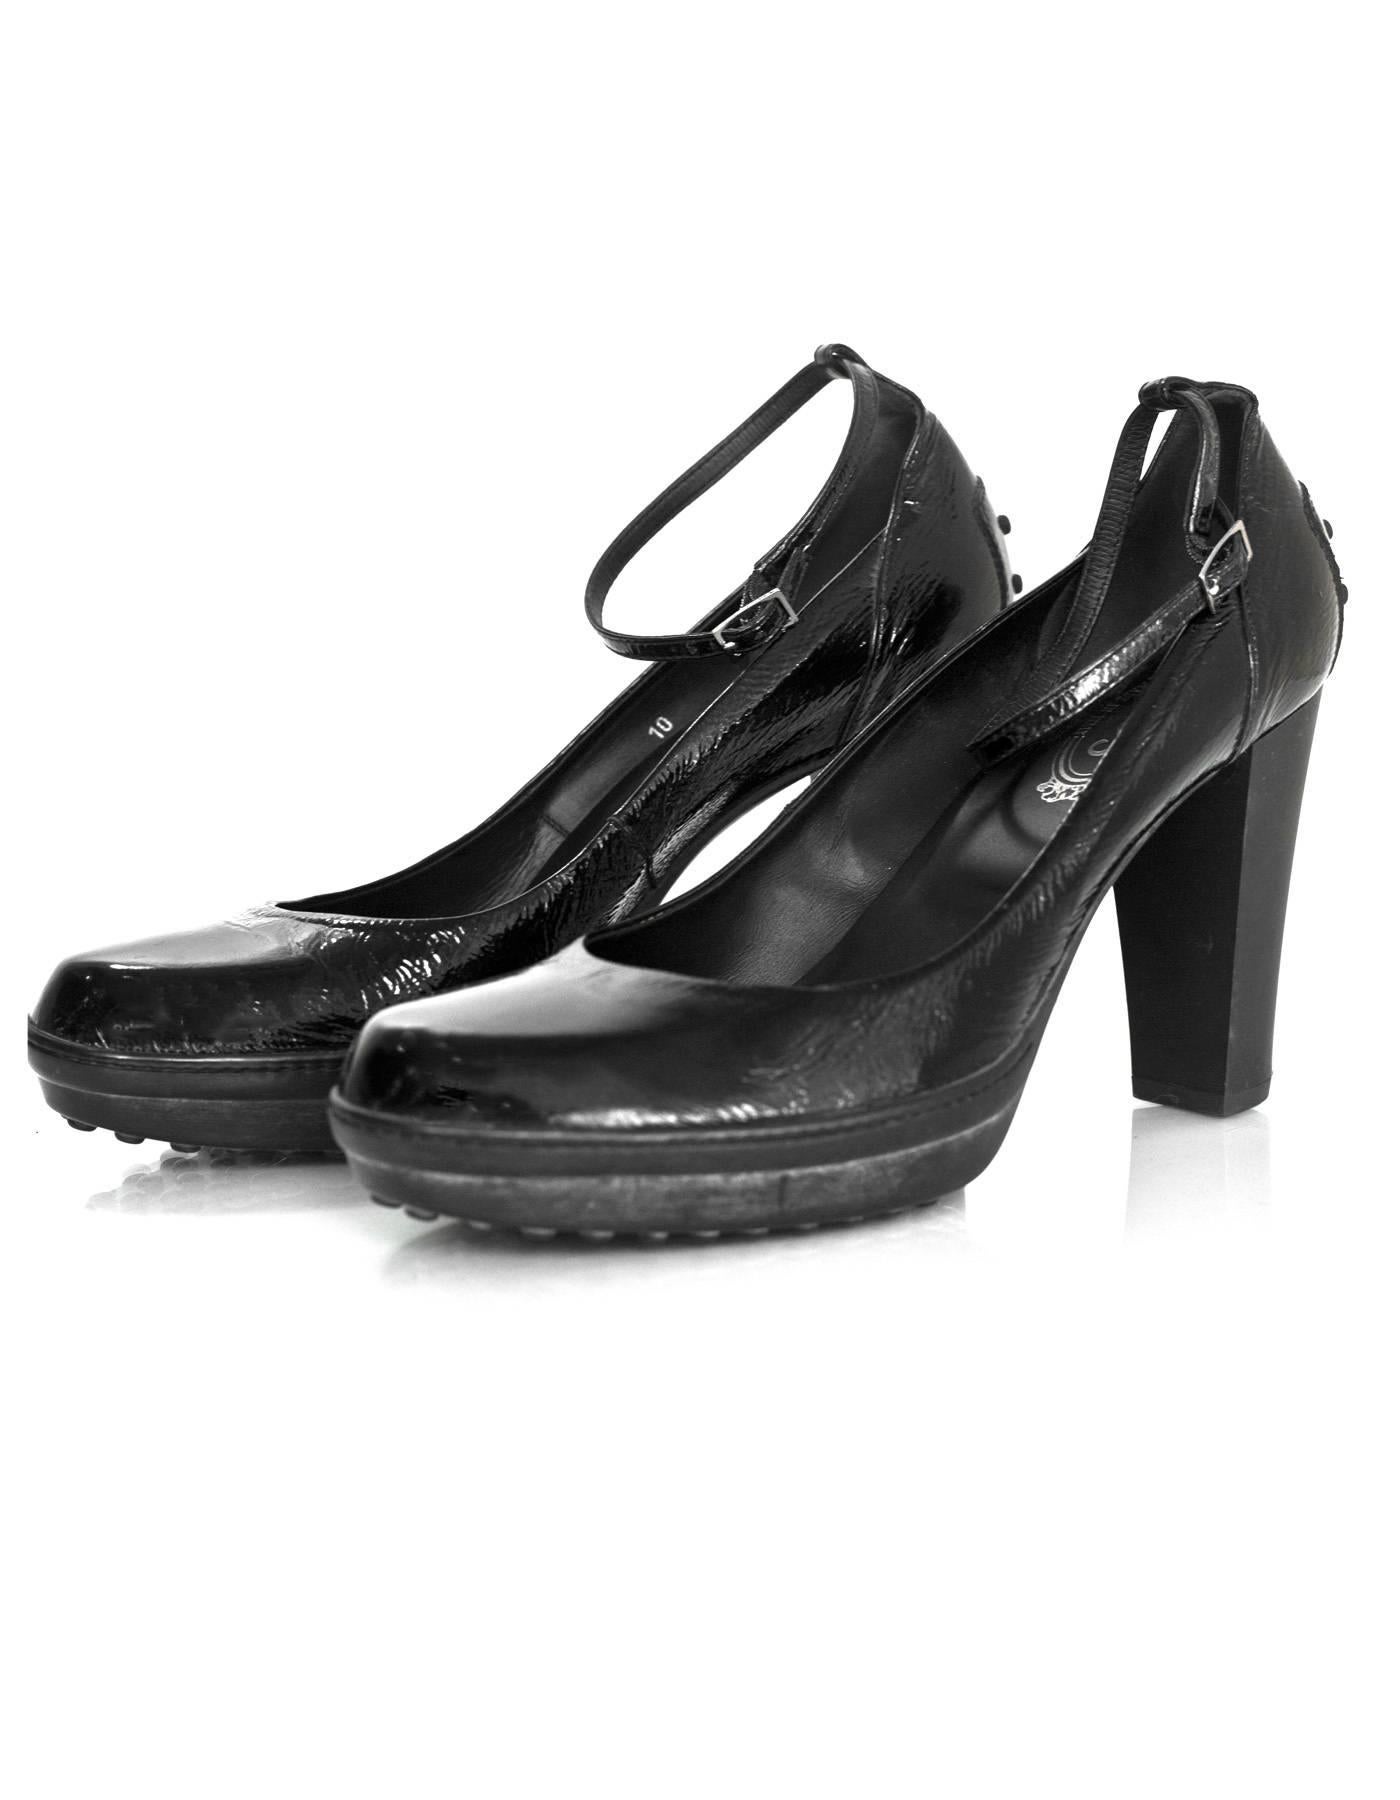 TOD's Black Patent Ankle Strap Pumps 
Features distressed patent leather

Made In: Italy
Color: Black
Materials: Patent leather
Closure/Opening: Ankle strap with buckle
Sole Stamp: TODS
Overall Condition: Very good pre-owned condition with the